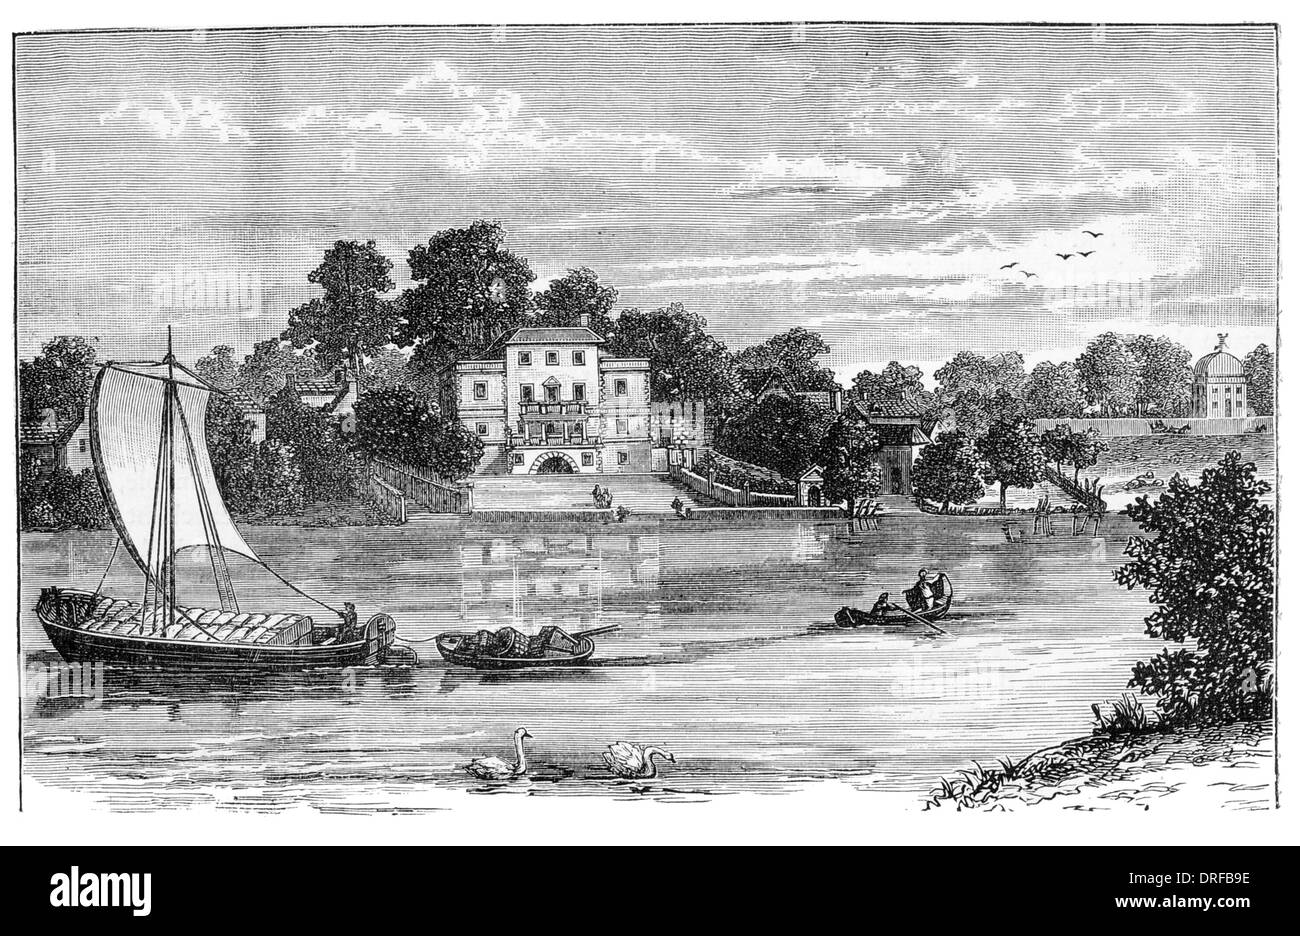 Alexander Pope, his House / Villa  on the River Thames at Twickenham  Middlesex London 1785 Stock Photo